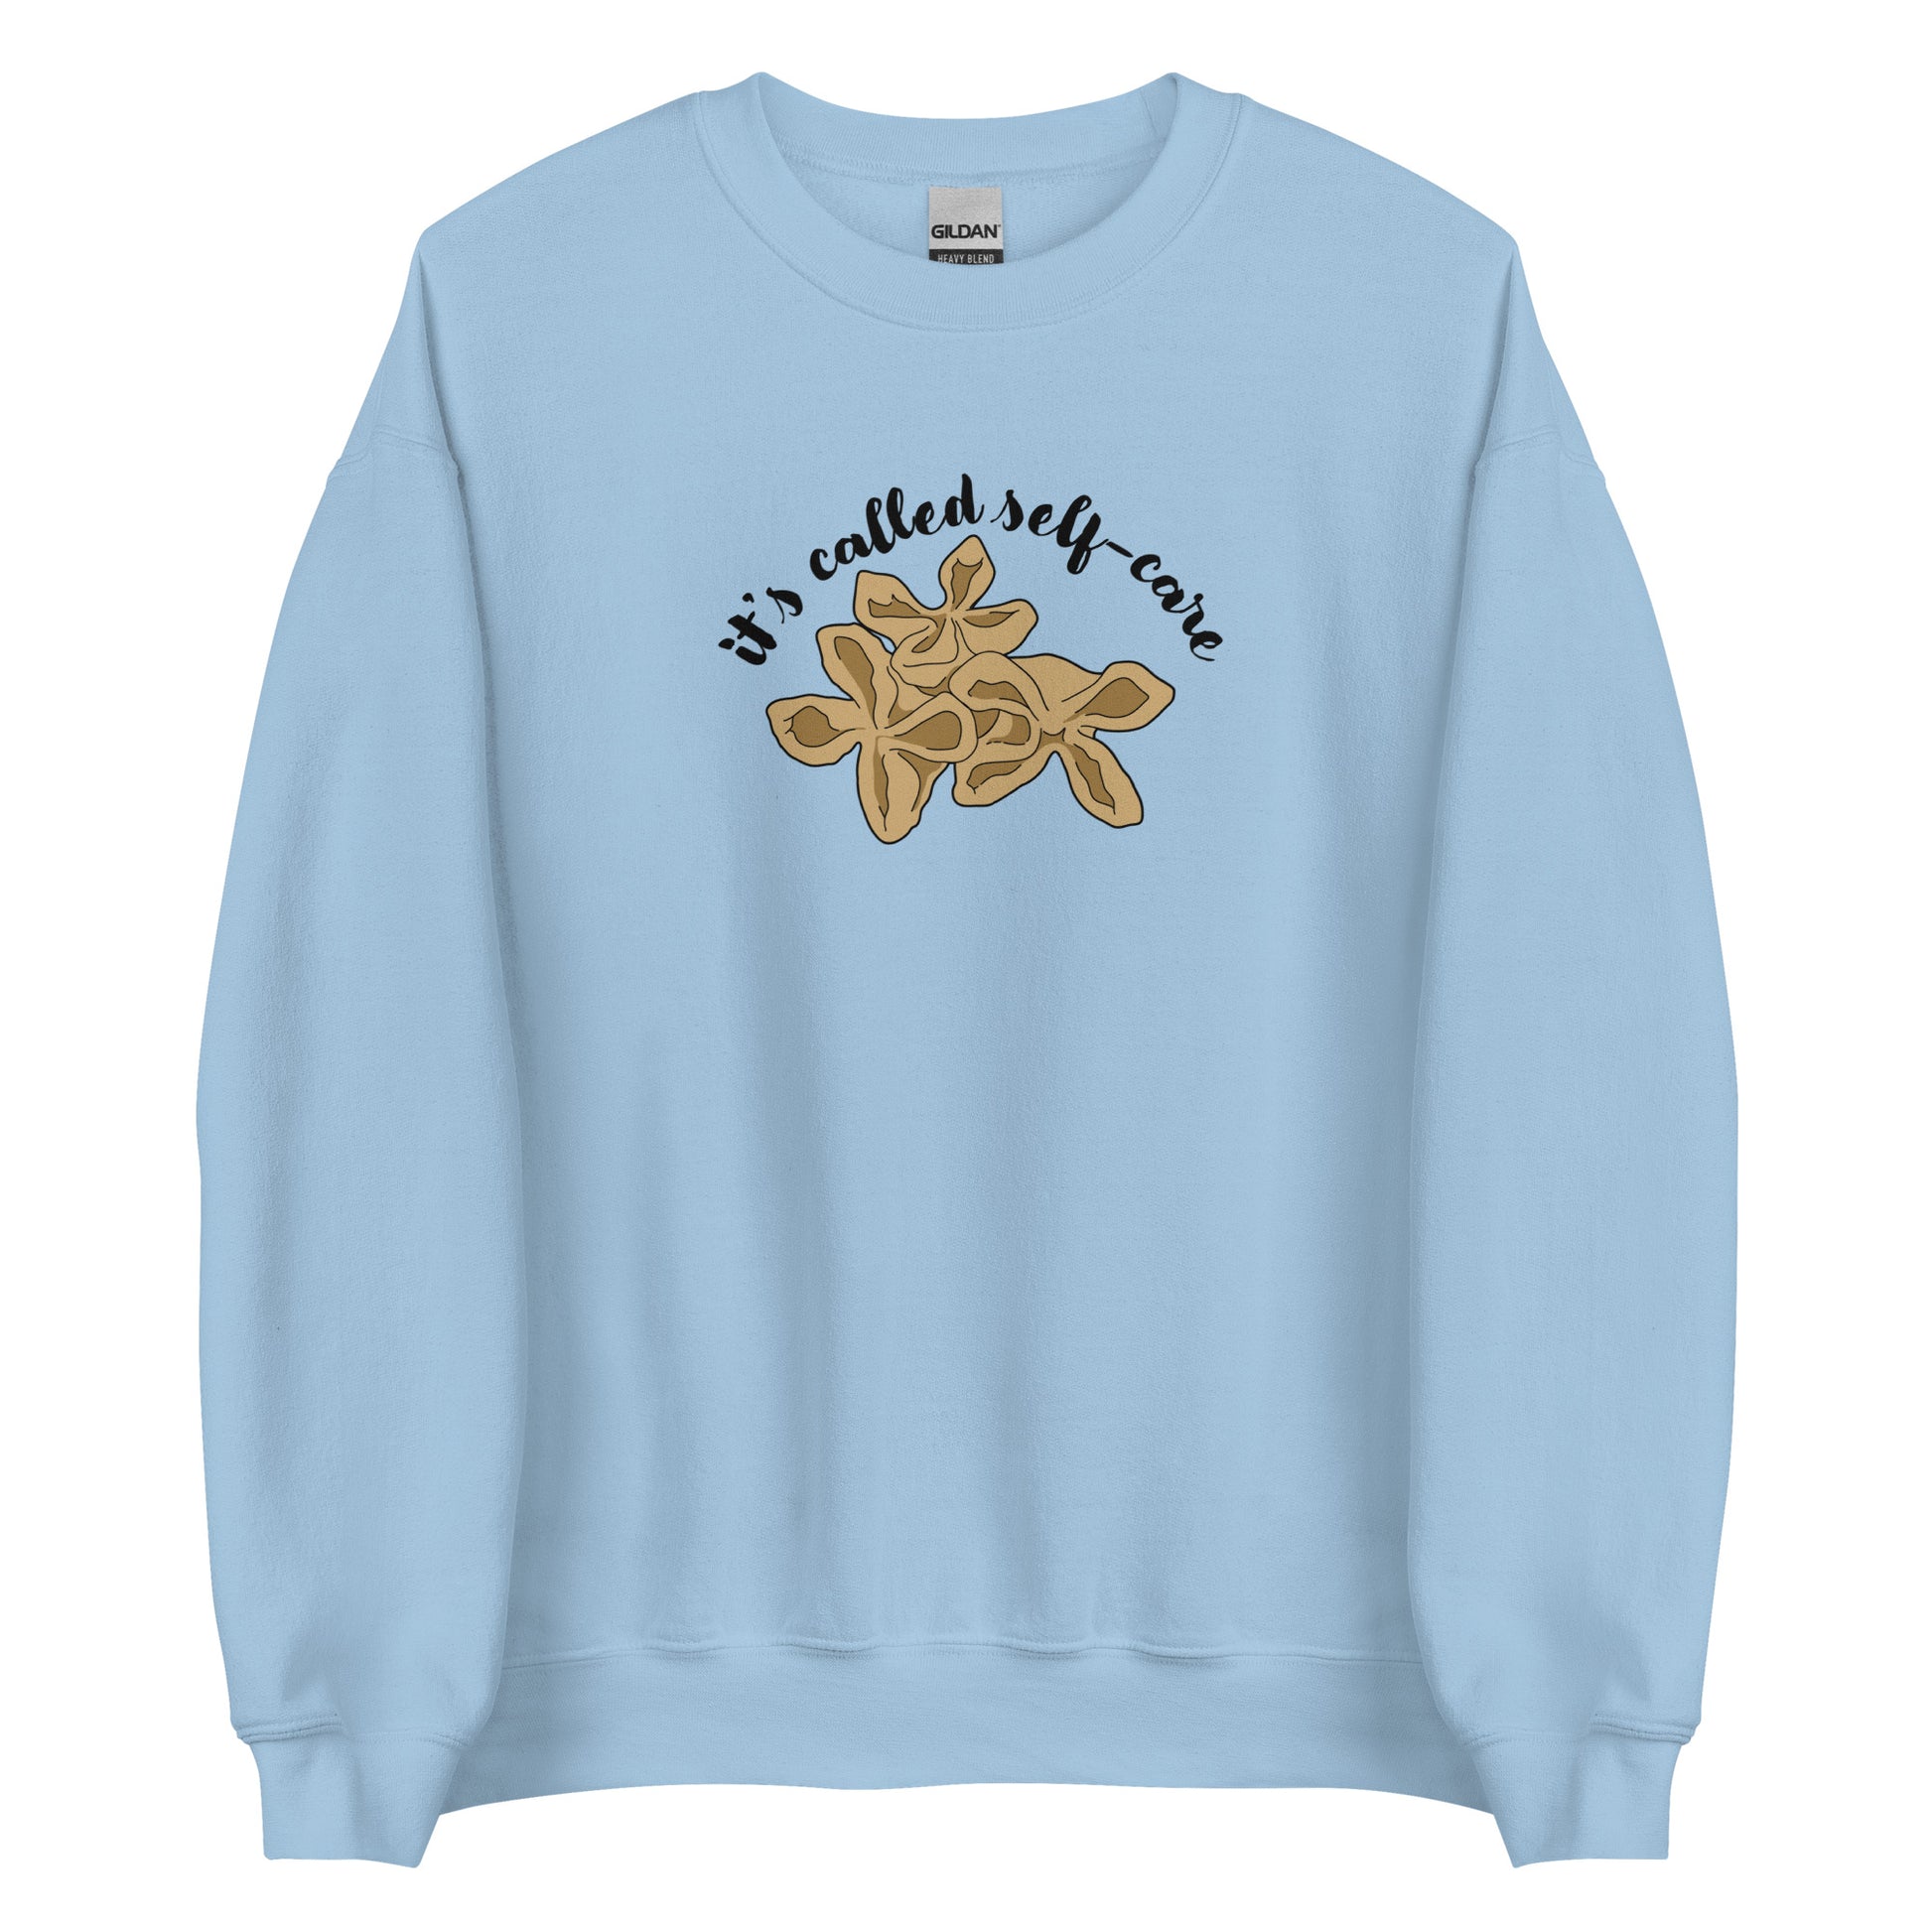 A light blue crewneck sweatshirt featuring an illustration of three pieces of crab rangoon. Text in an arc above the crab rangoon reads "it's called self-care" in a cursive script.